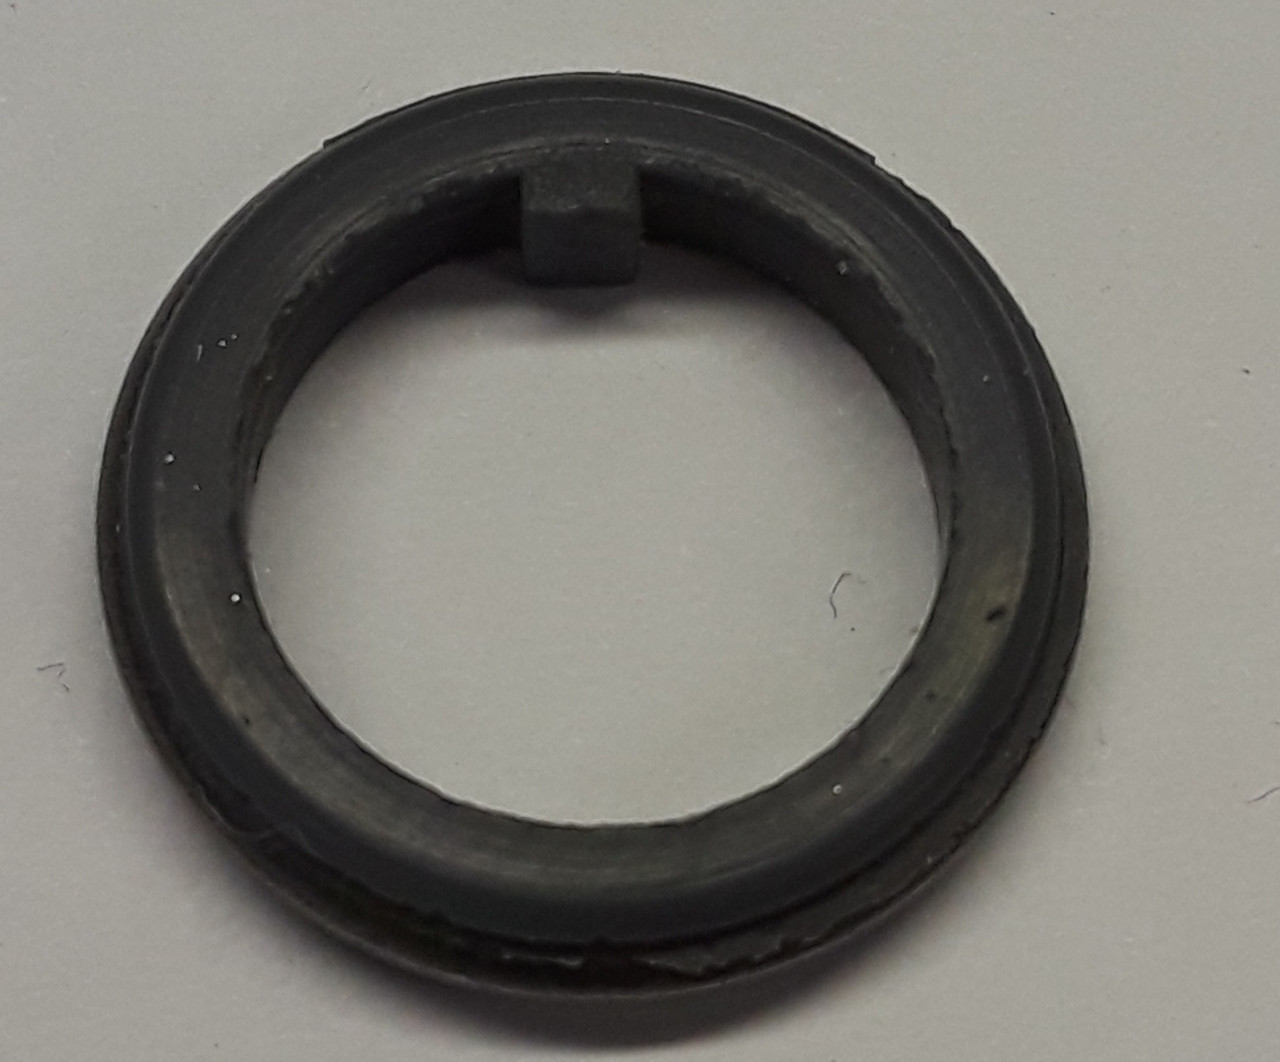 60064 Bushing Seal for Toggle and Push Button Switches, M5423/17-01